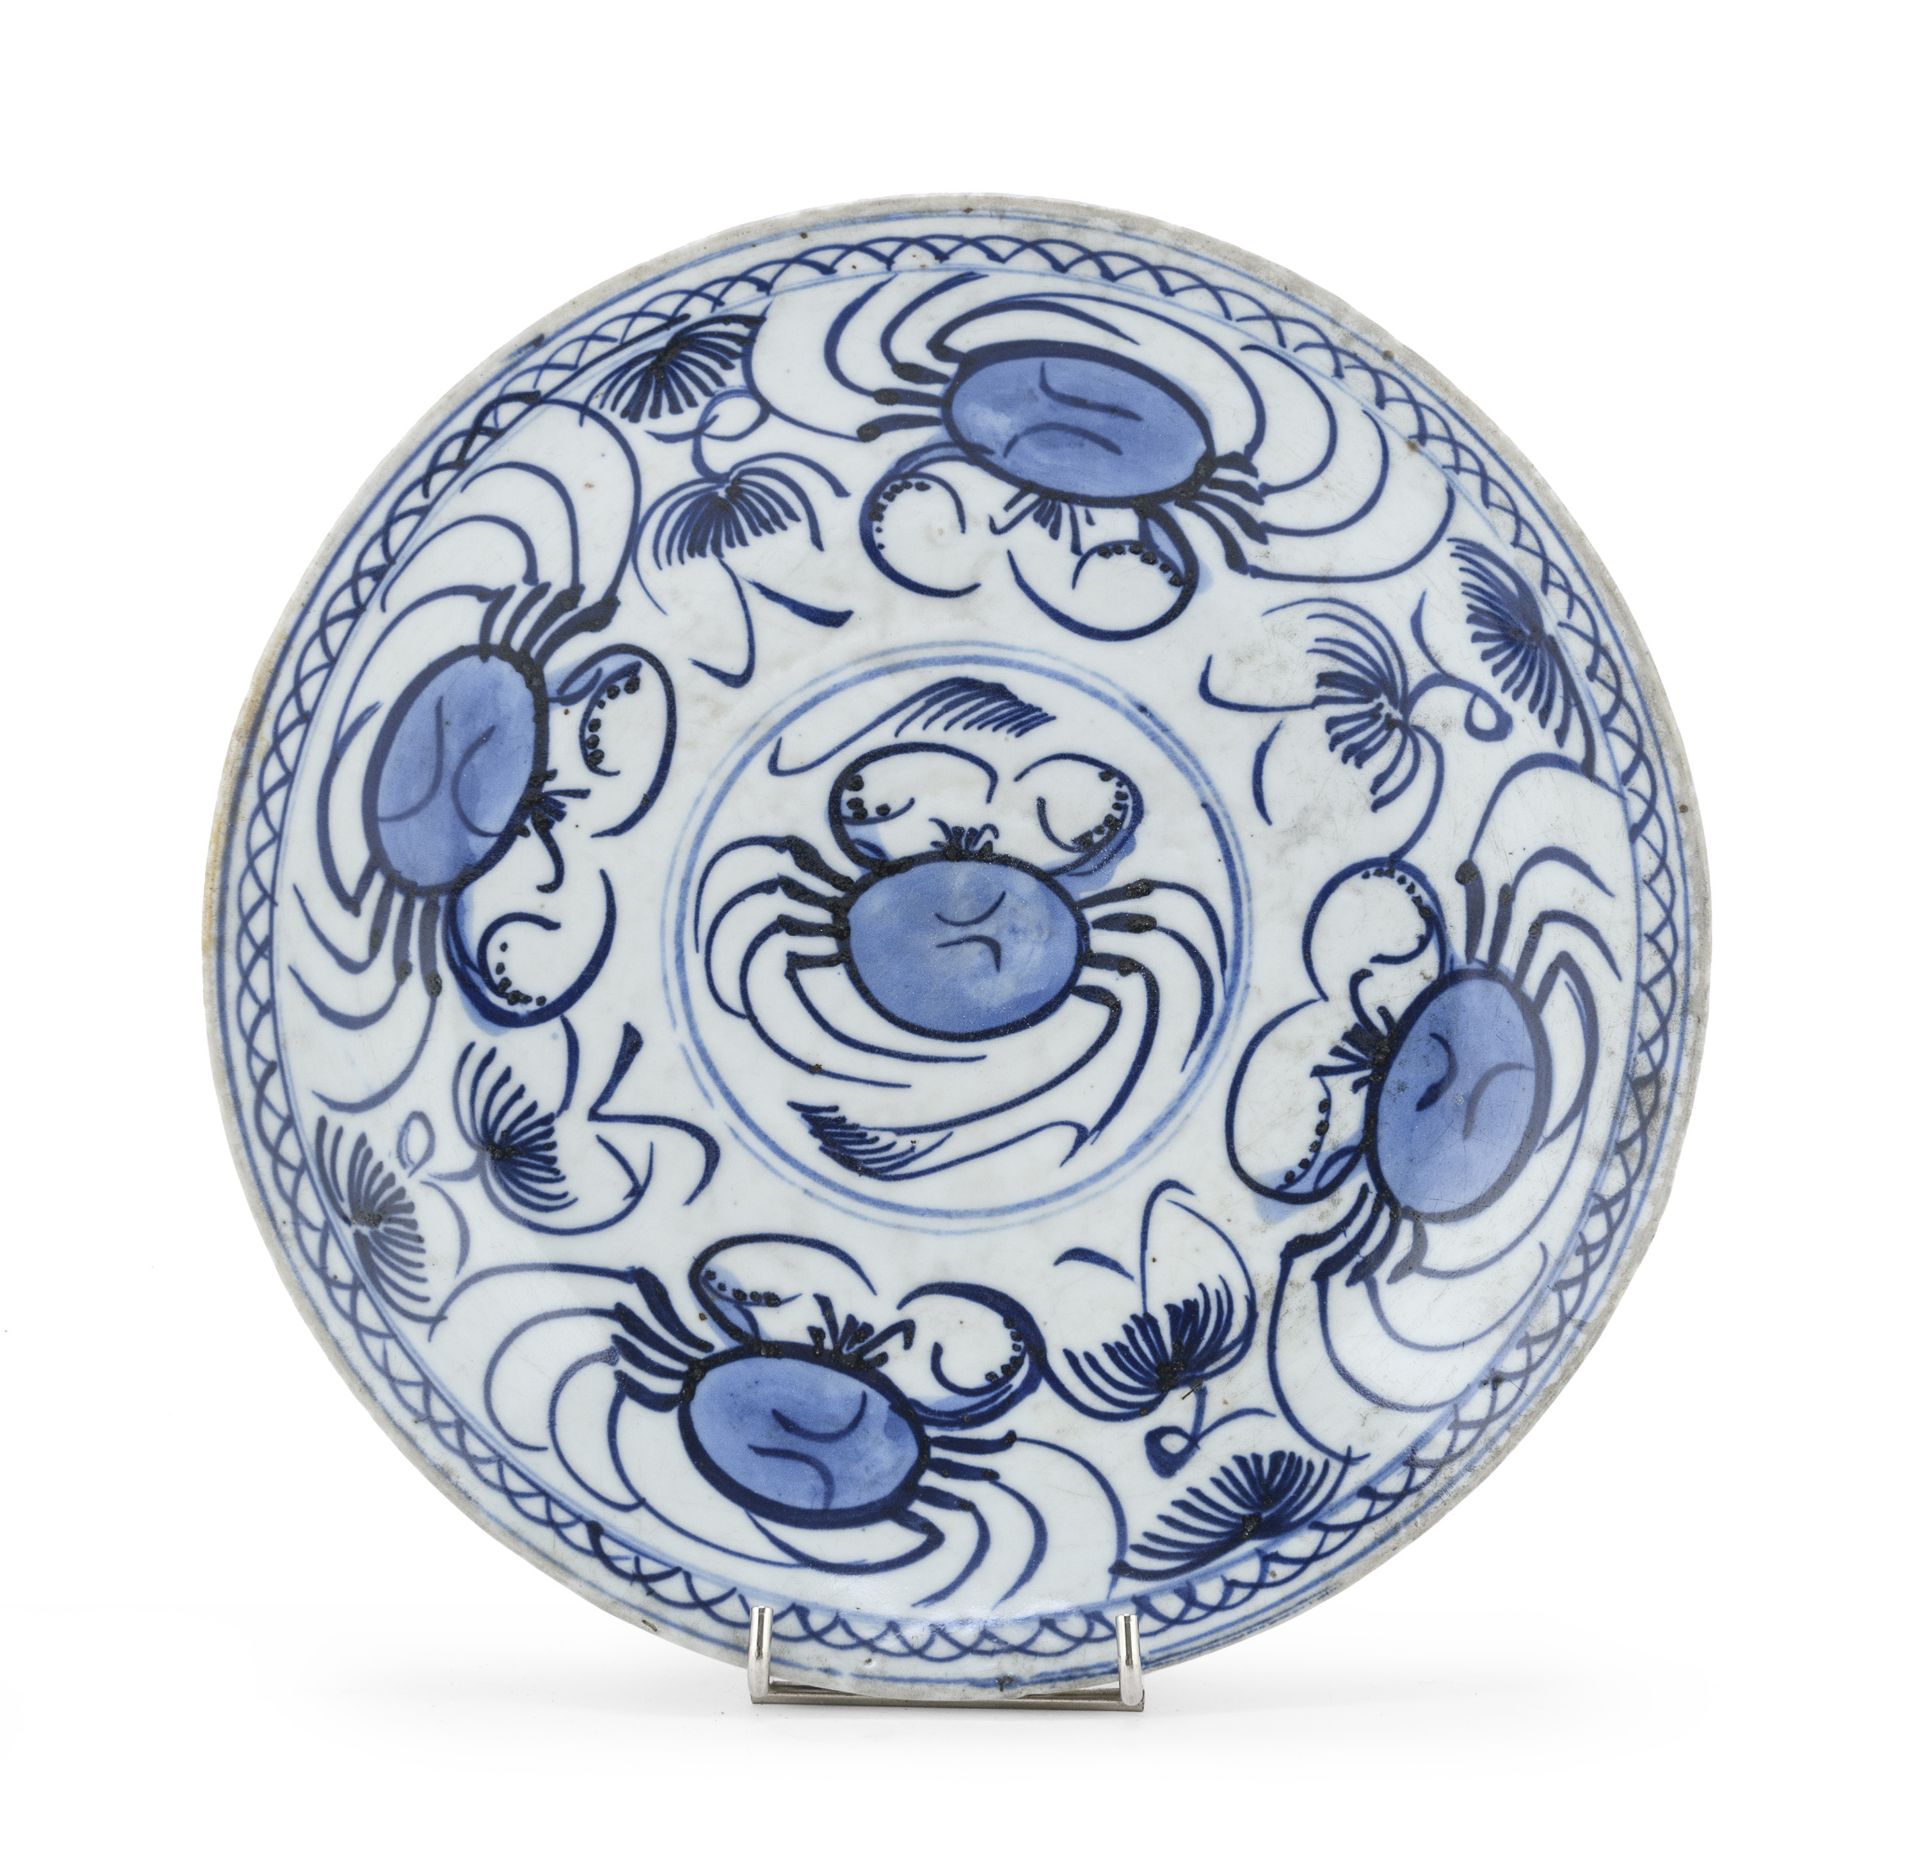 BLUE AND WHITE PORCELAIN DISH CHINA 19TH CENTURY